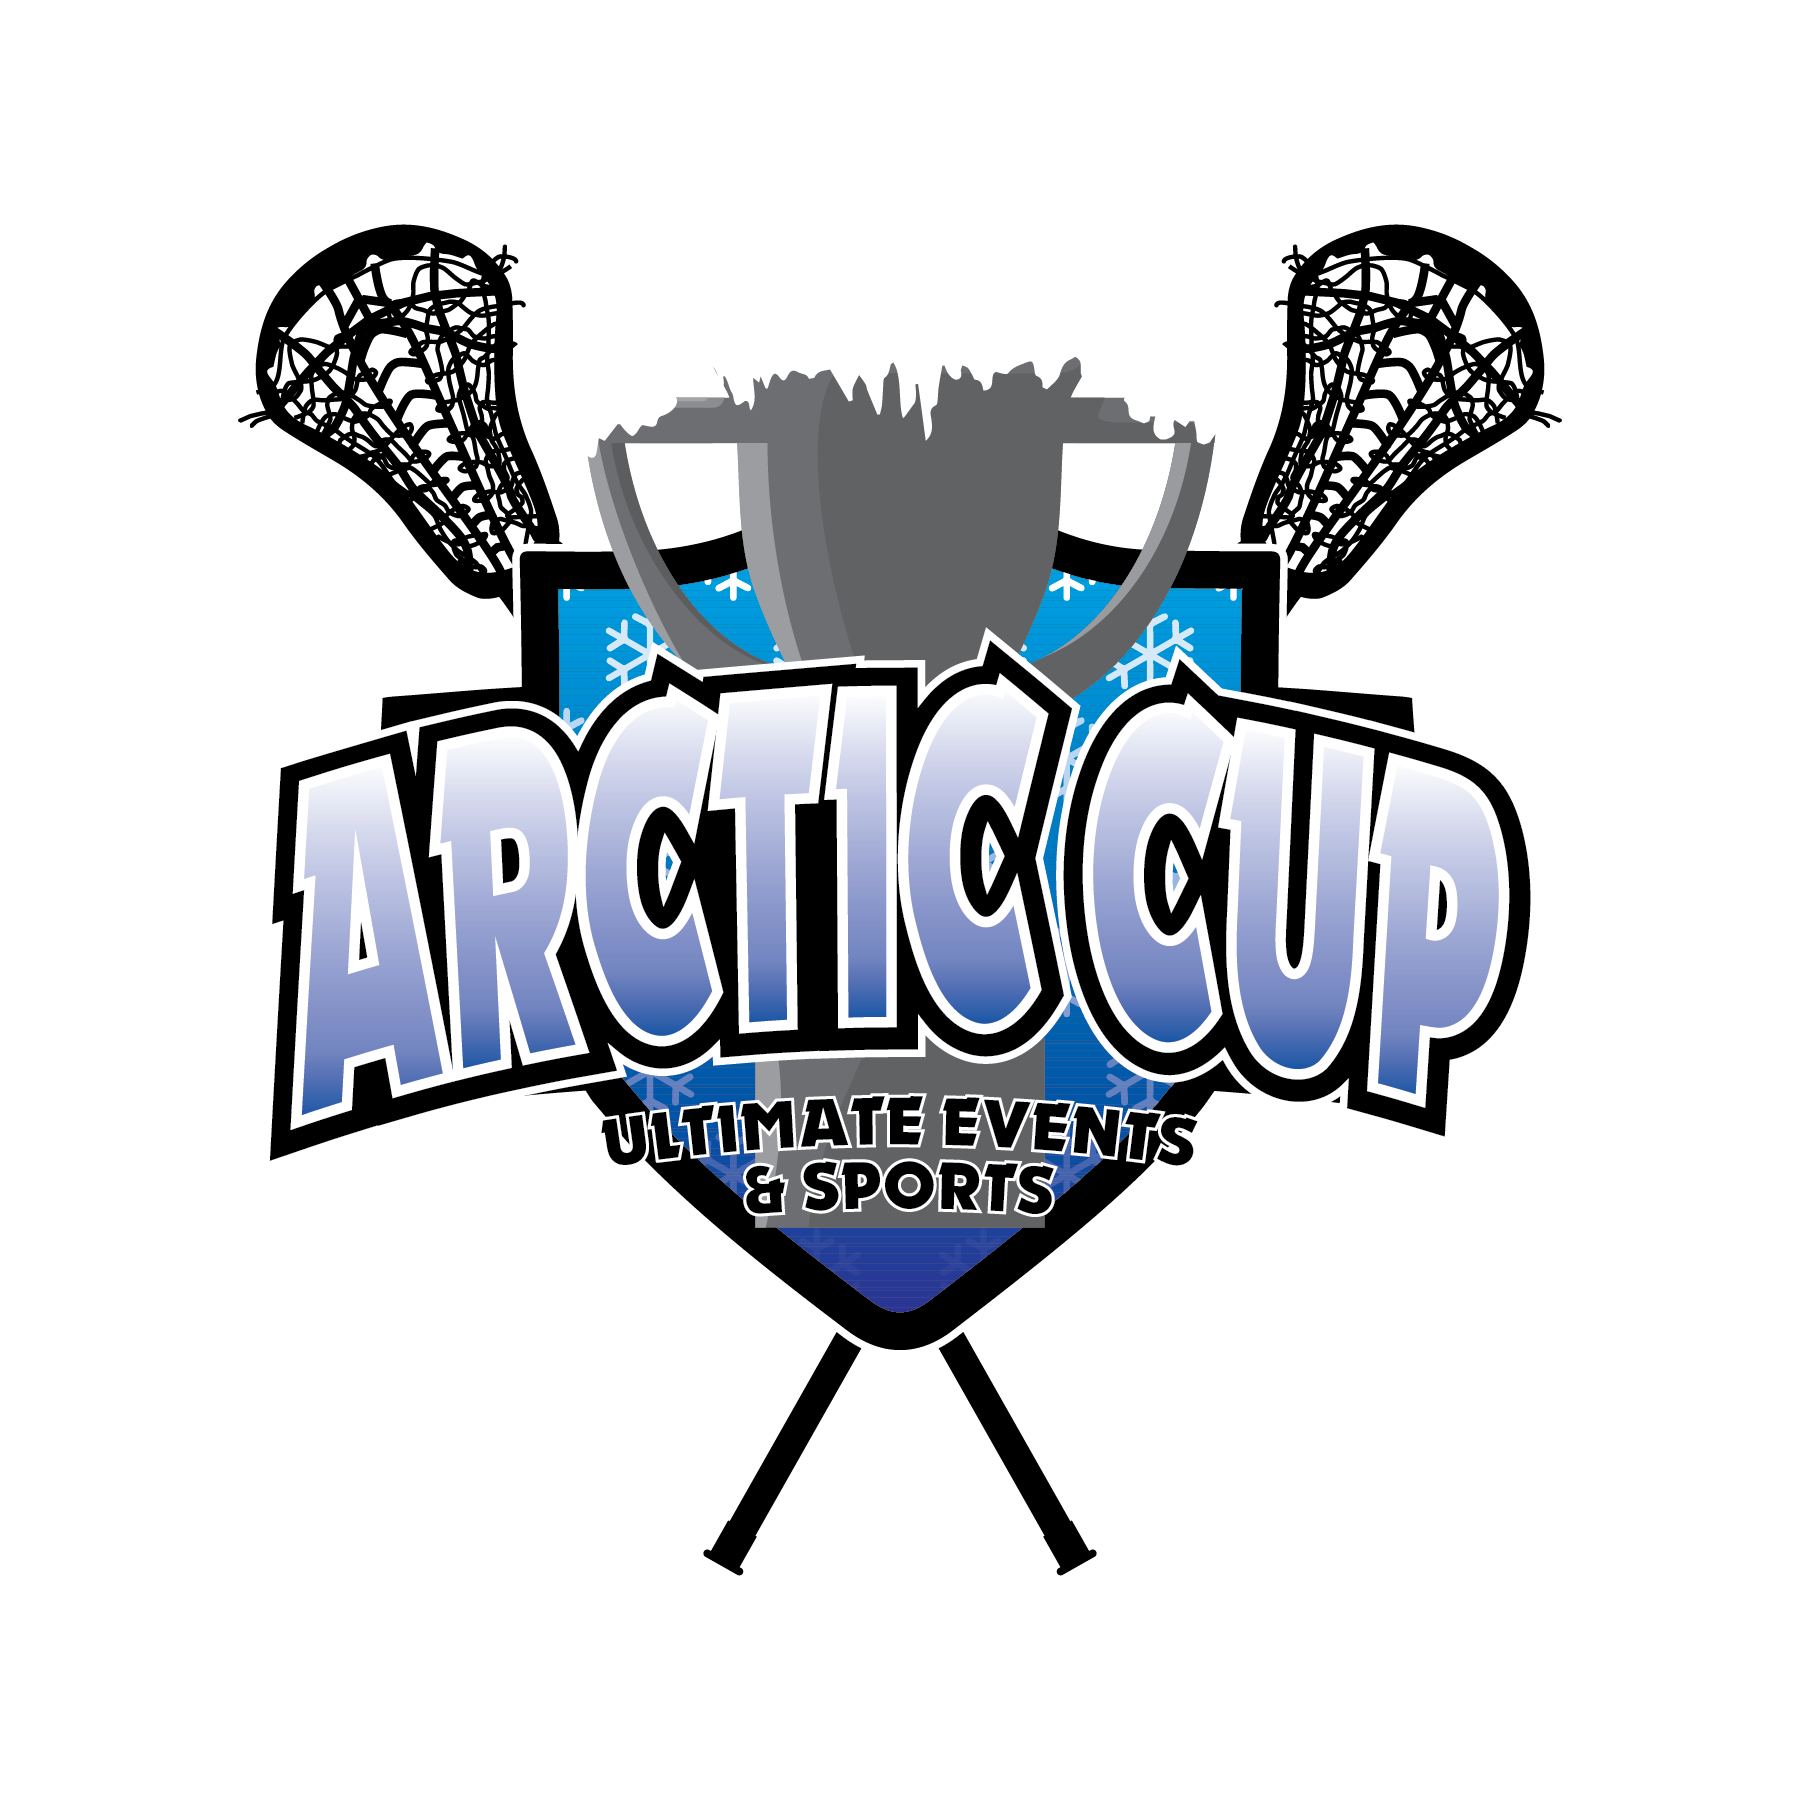 Ultimate Events & Sports - Arctic Cup Logos[1]-01